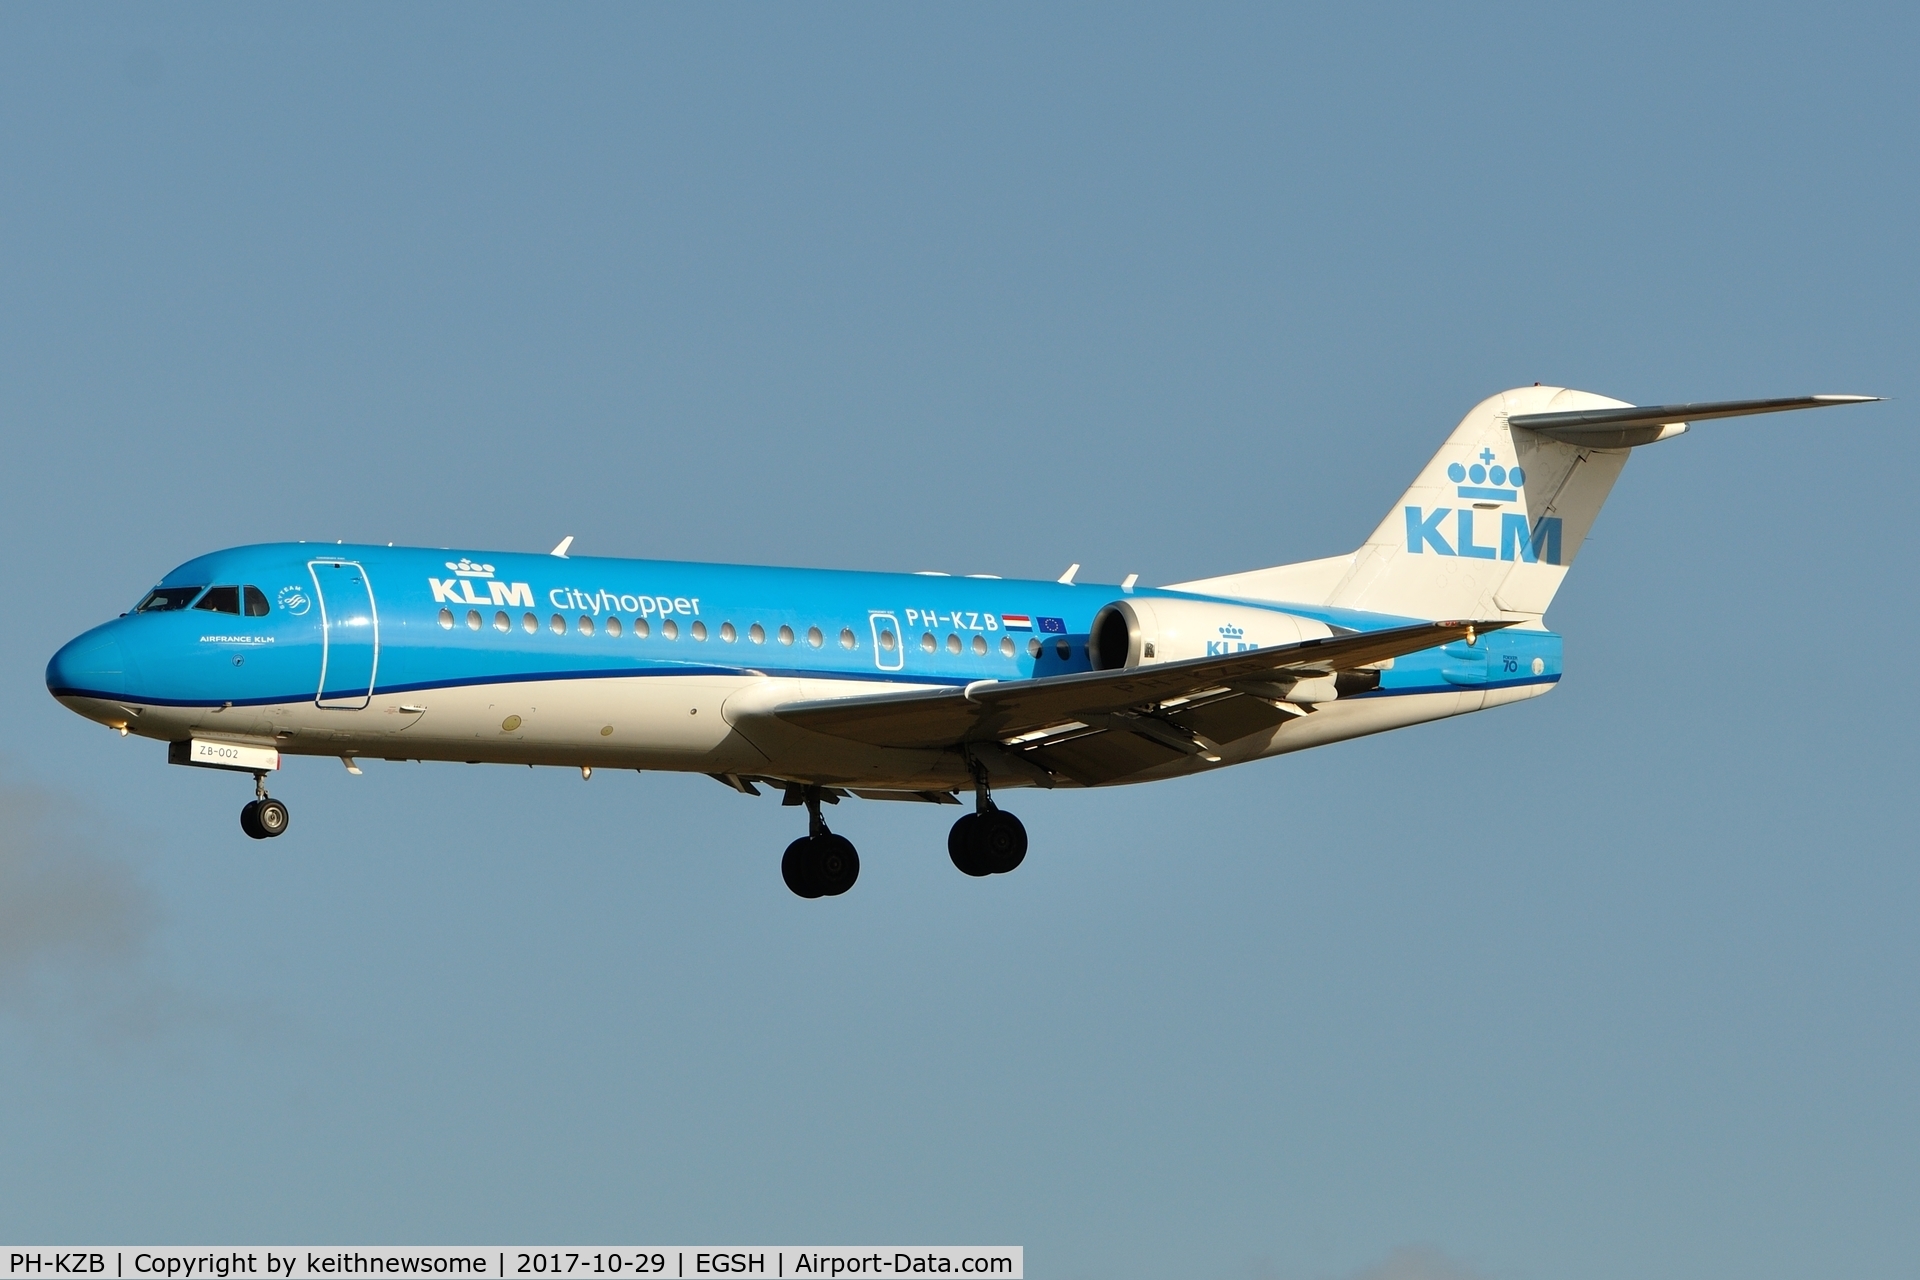 PH-KZB, 1996 Fokker 70 (F-28-070) C/N 11562, Arriving from Amsterdam for storage.